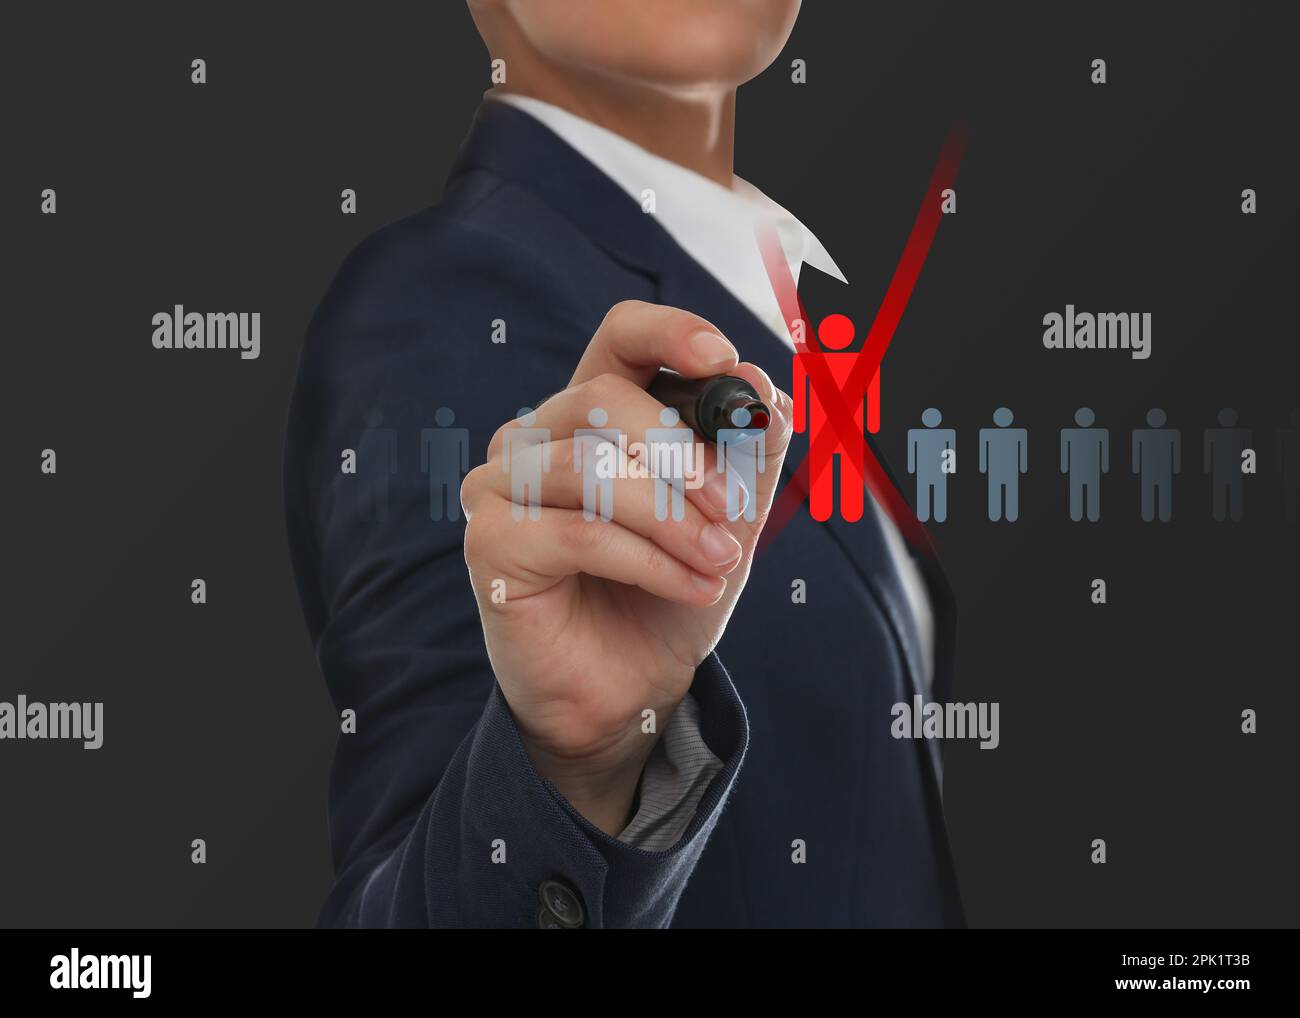 Deciding whether to dismiss employee. Woman with marker near virtual screen, closeup Stock Photo